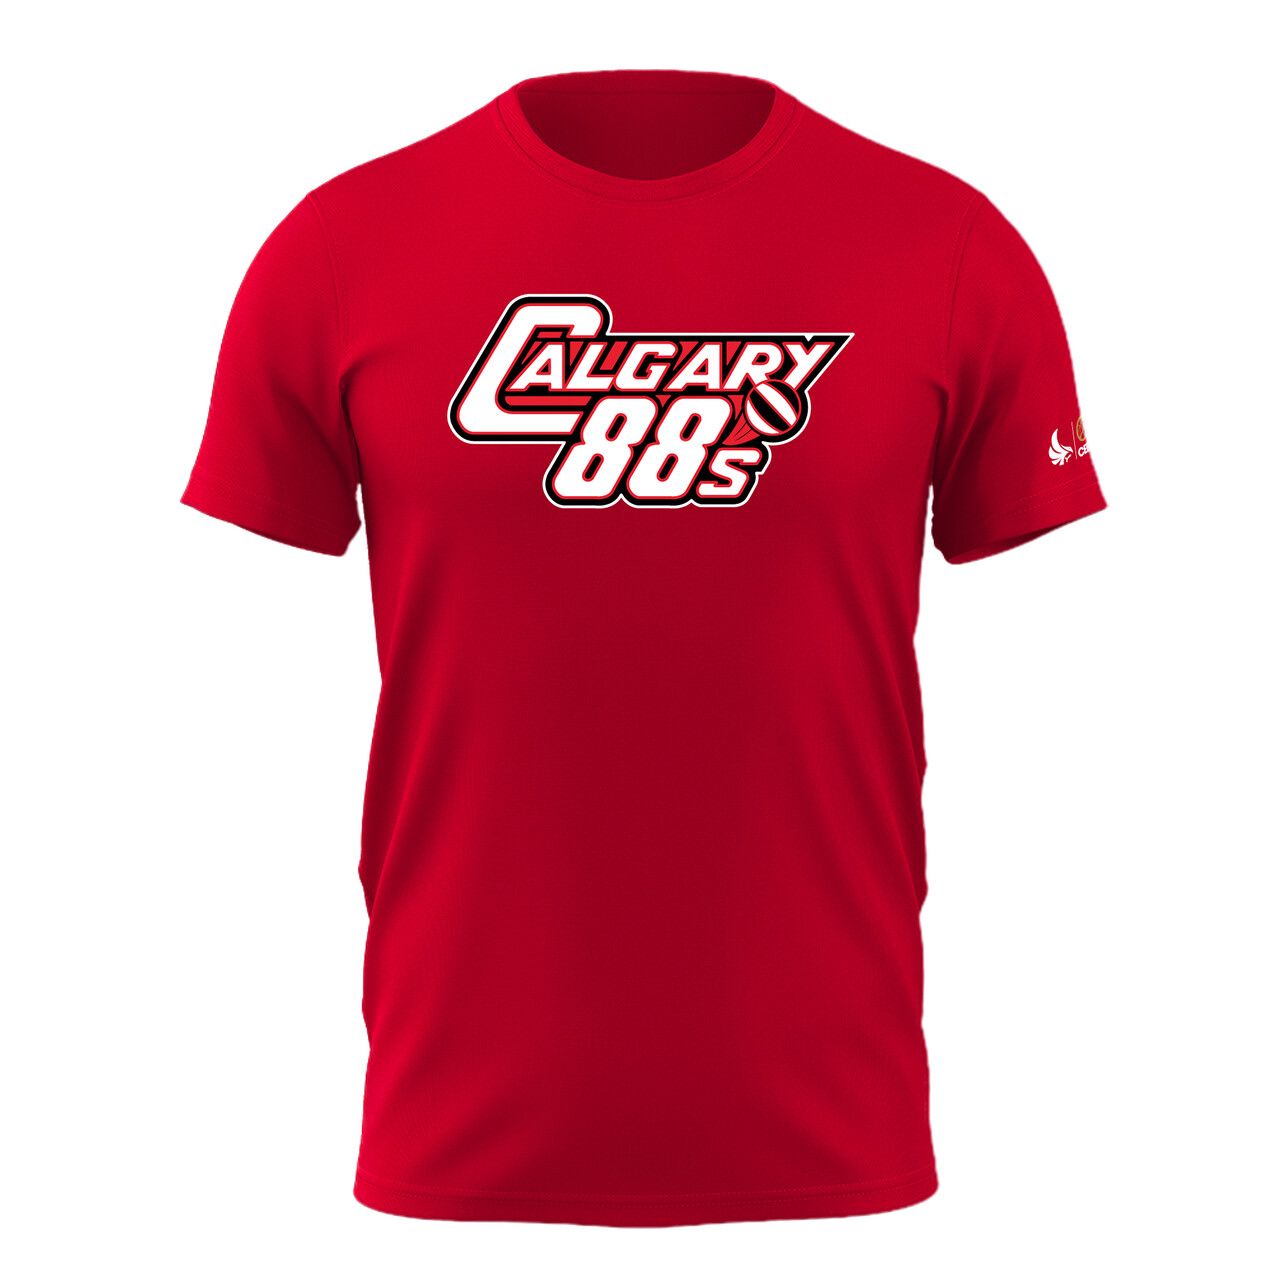 CALGARY 88's – RED, SIZE: SMALL